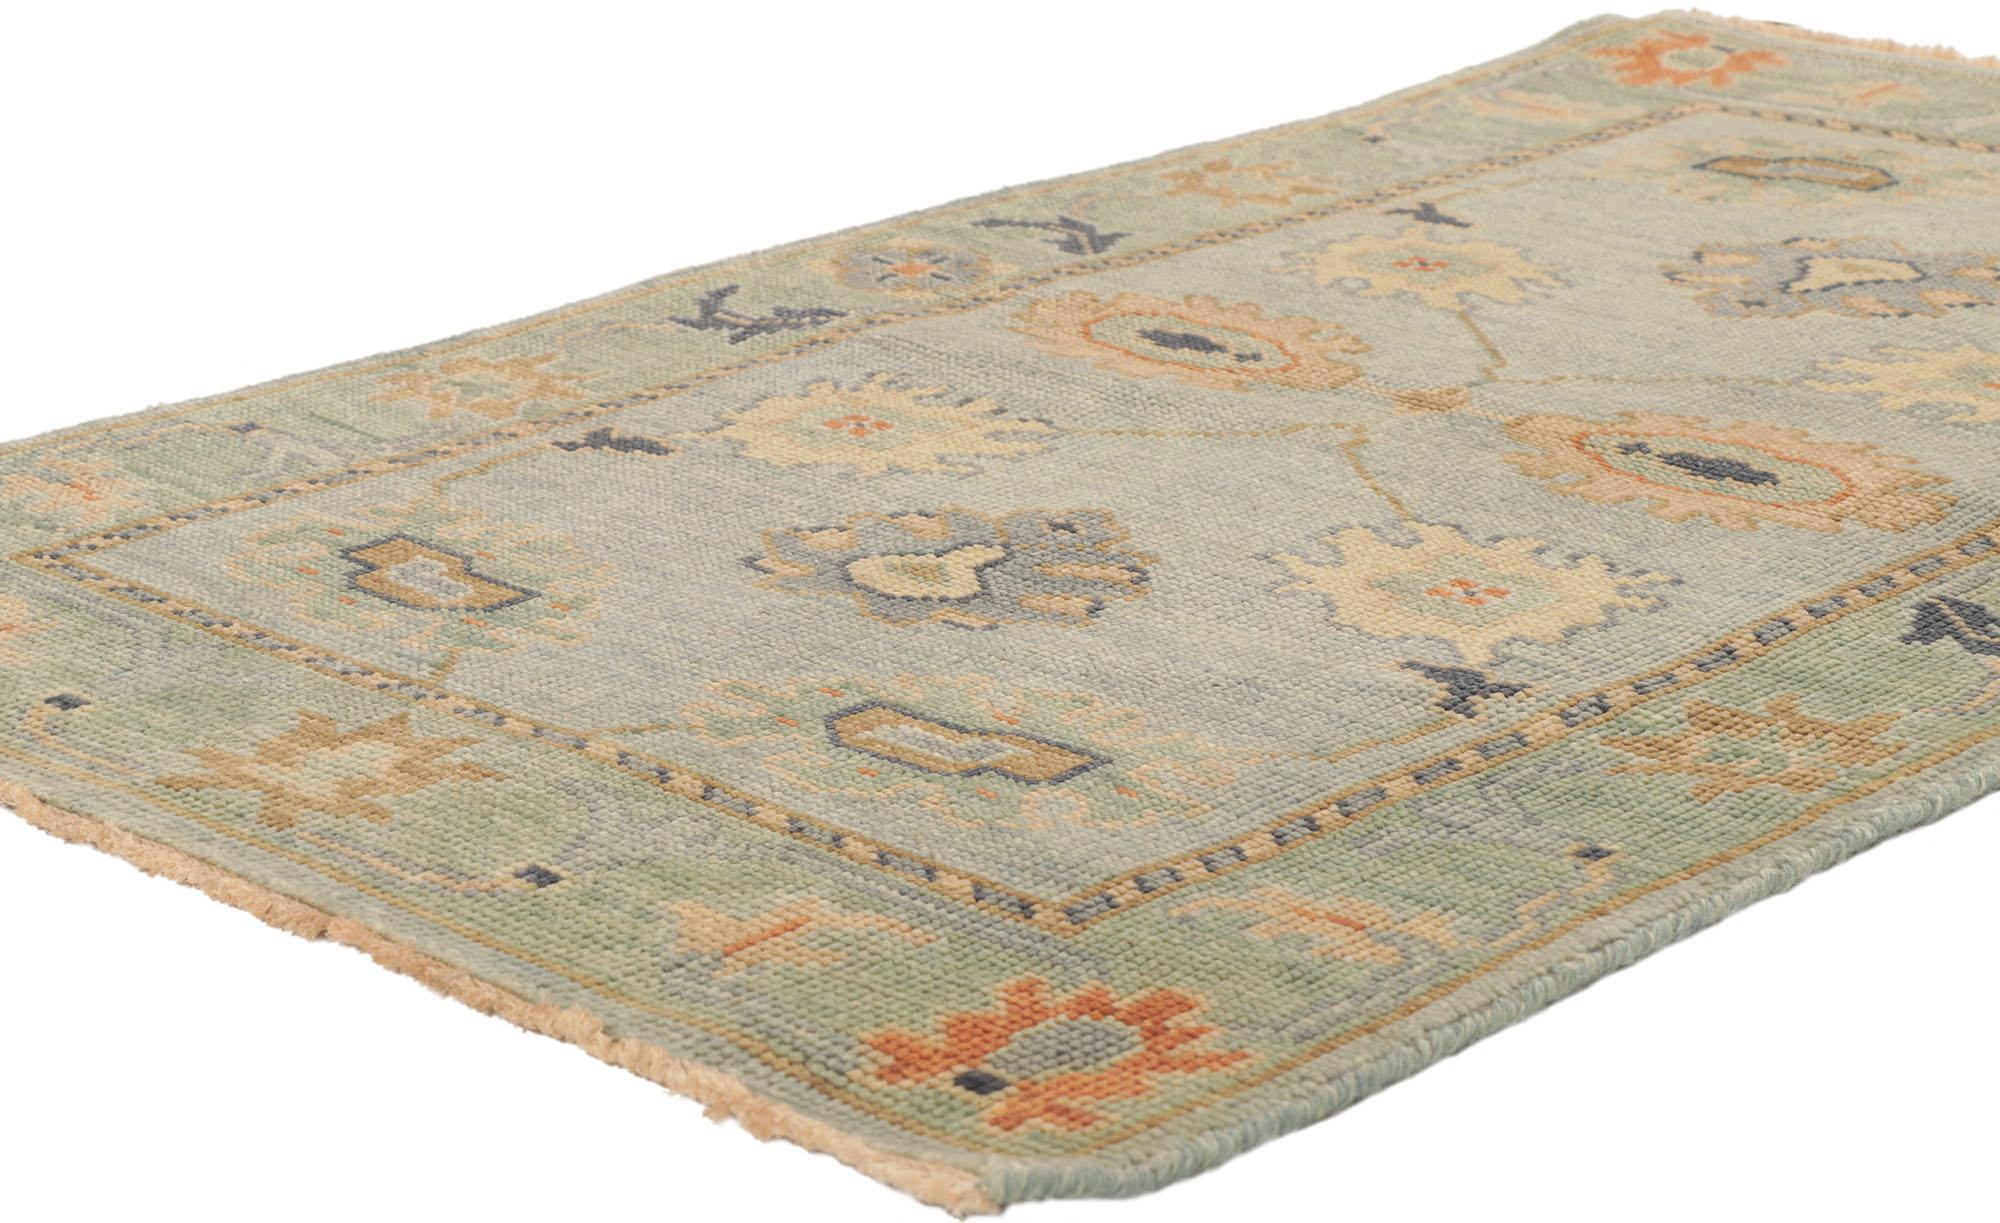 80693 New Contemporary Oushak Rug with Modern Style 03'02 x 05'03. With its timeless design and sophisticated elegance, this hand-knotted wool small Oushak rug beautifully embodies a modern style. The abrashed light blue field features a botanical